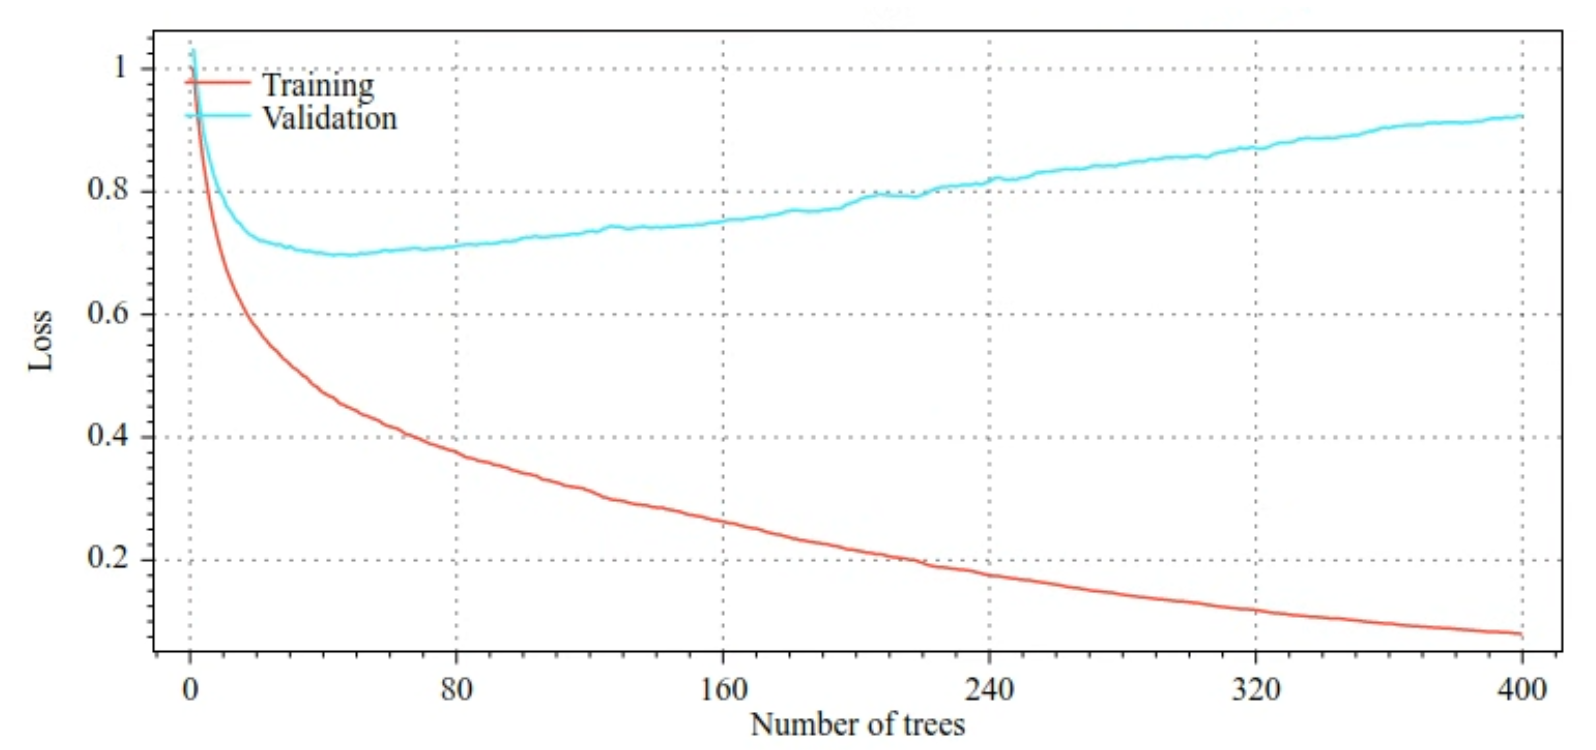 Plots of training loss and validation loss versus the number of
  decision trees. Training loss gradually decreases as the number
  of decision trees increases. However, validation loss only decreases
  until about 40 decision trees. With more than 40 decision trees,
  validation loss actually increases. With 400 decision trees, the
  gap between training loss and validation loss is
  enormous.